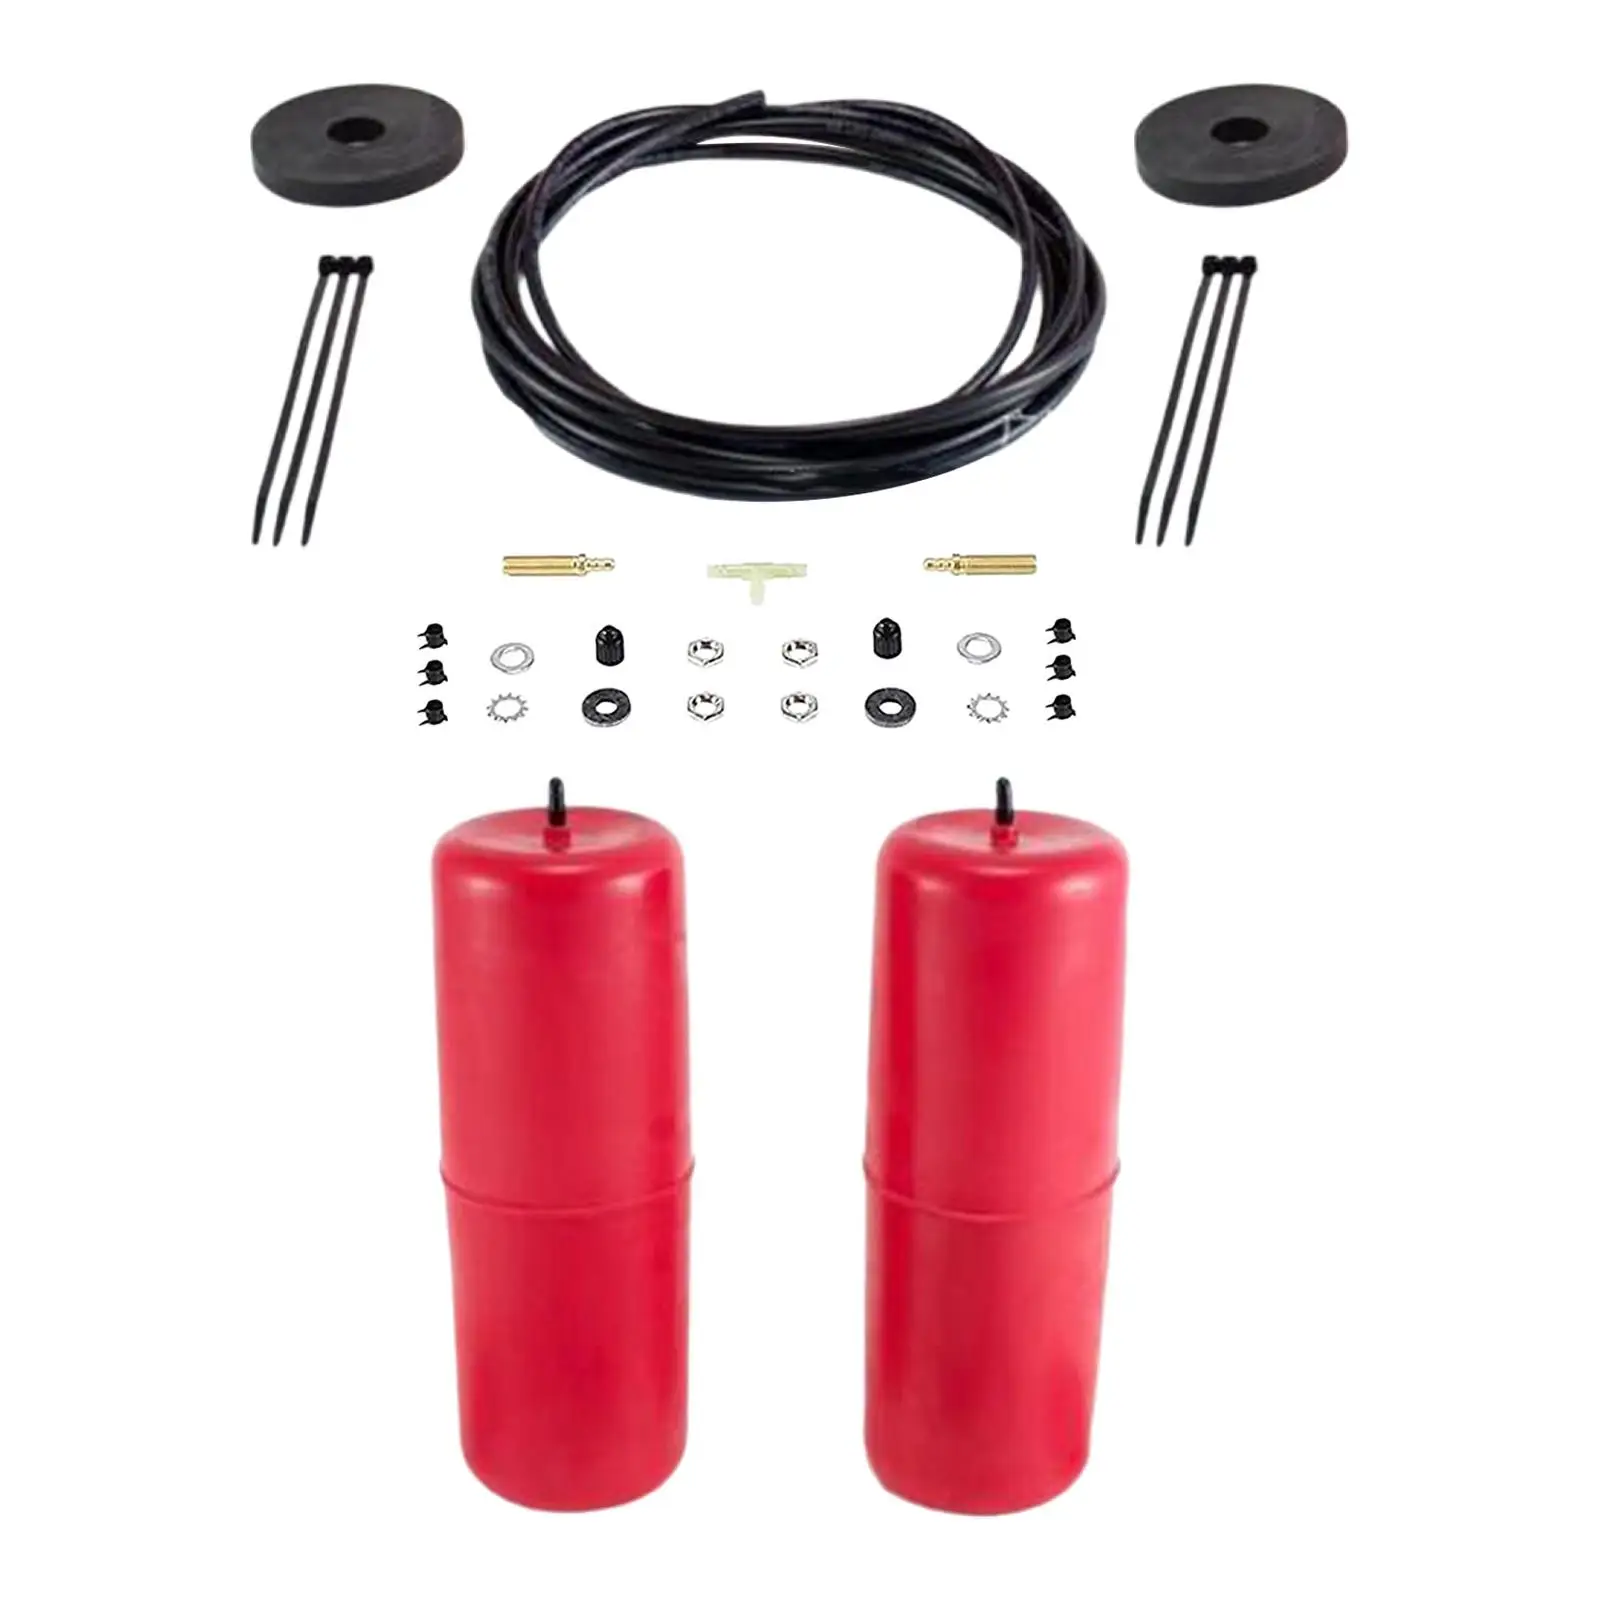 Air Suspension Kit 60818 Professional Stable Performance 1000 lbs Load